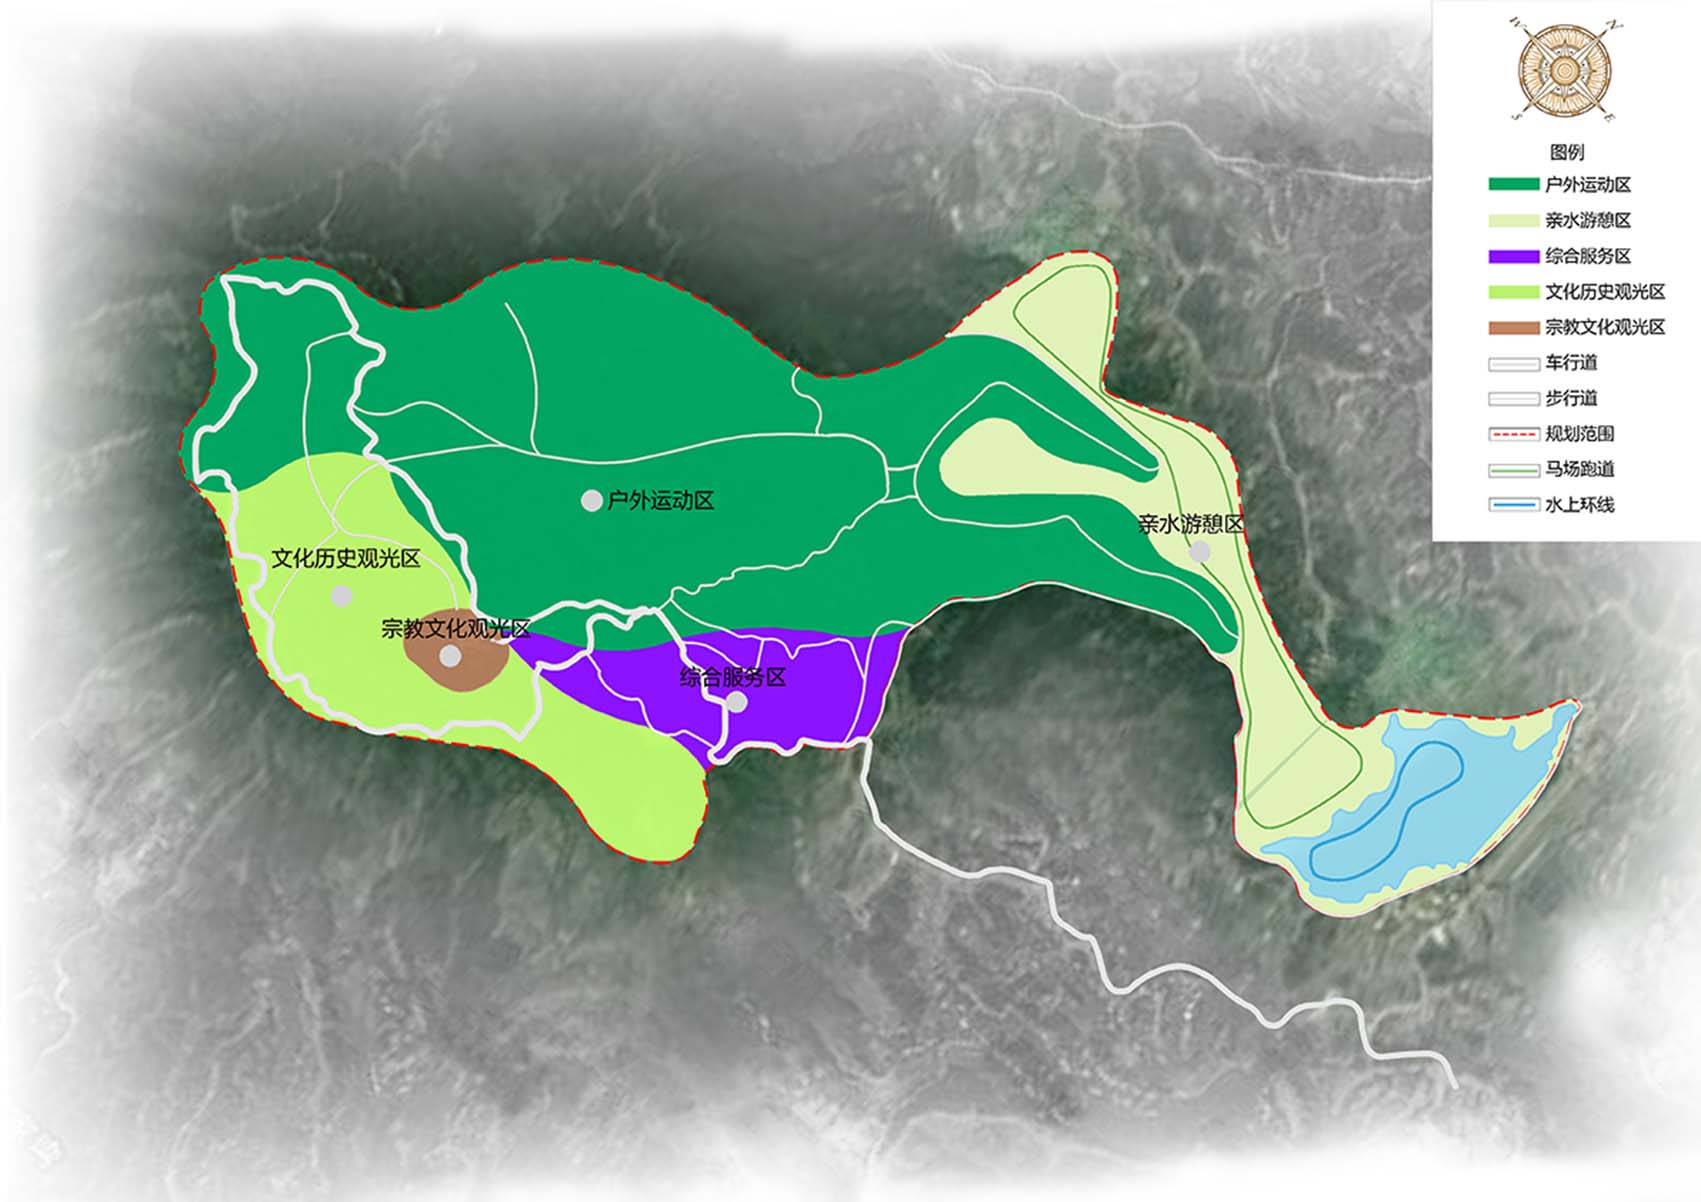 Master plan of xianguangshan cultural tourist attraction in Suizhou City Hubei Province (2015-2025)(图2)